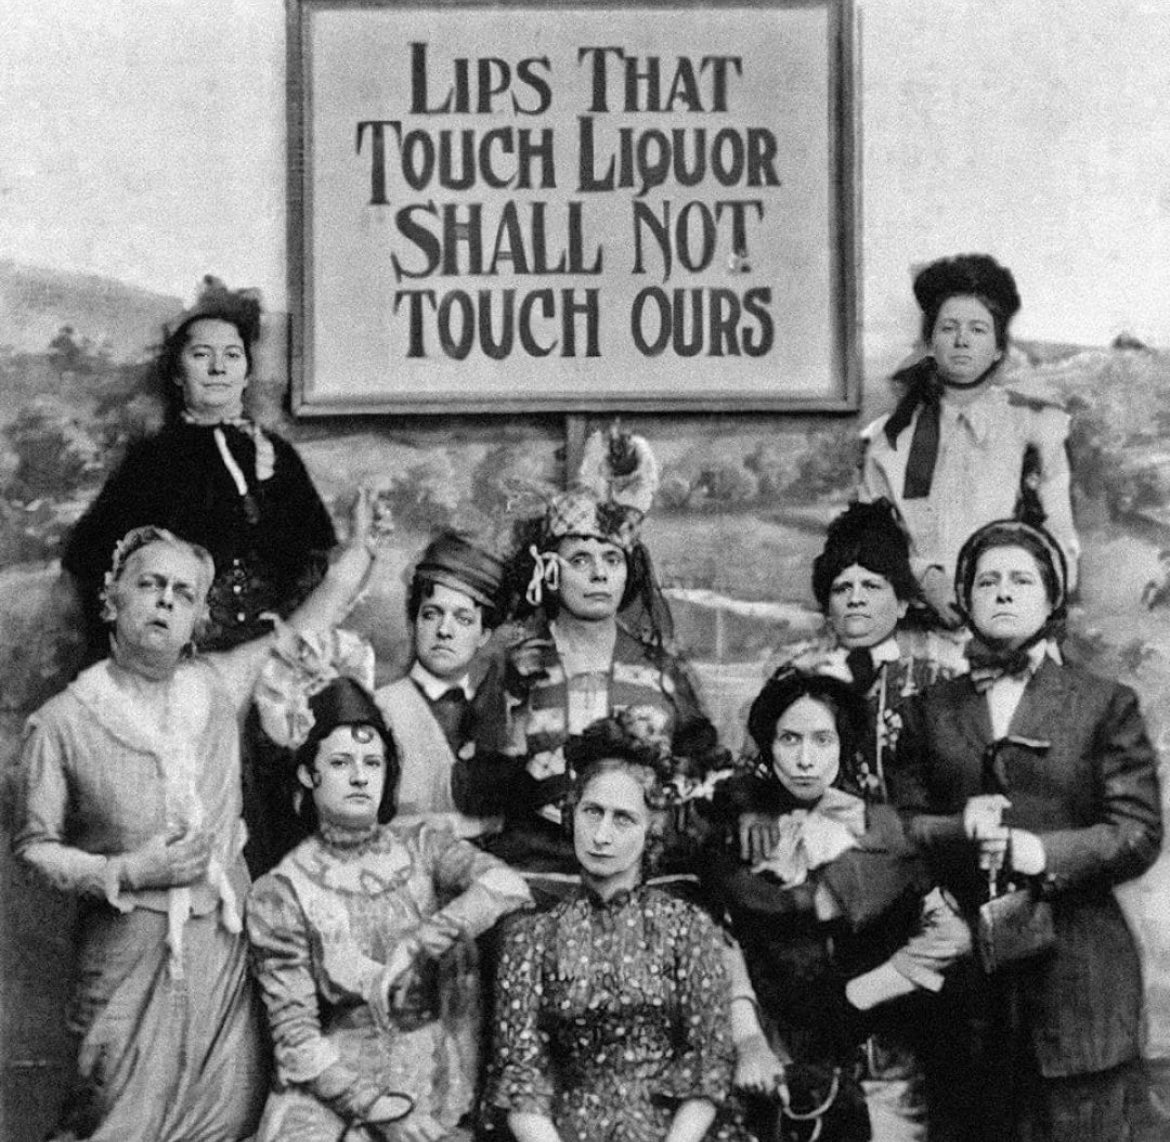 Lips That Touch Liquor Shall Not Touch Ours, c. 1900.